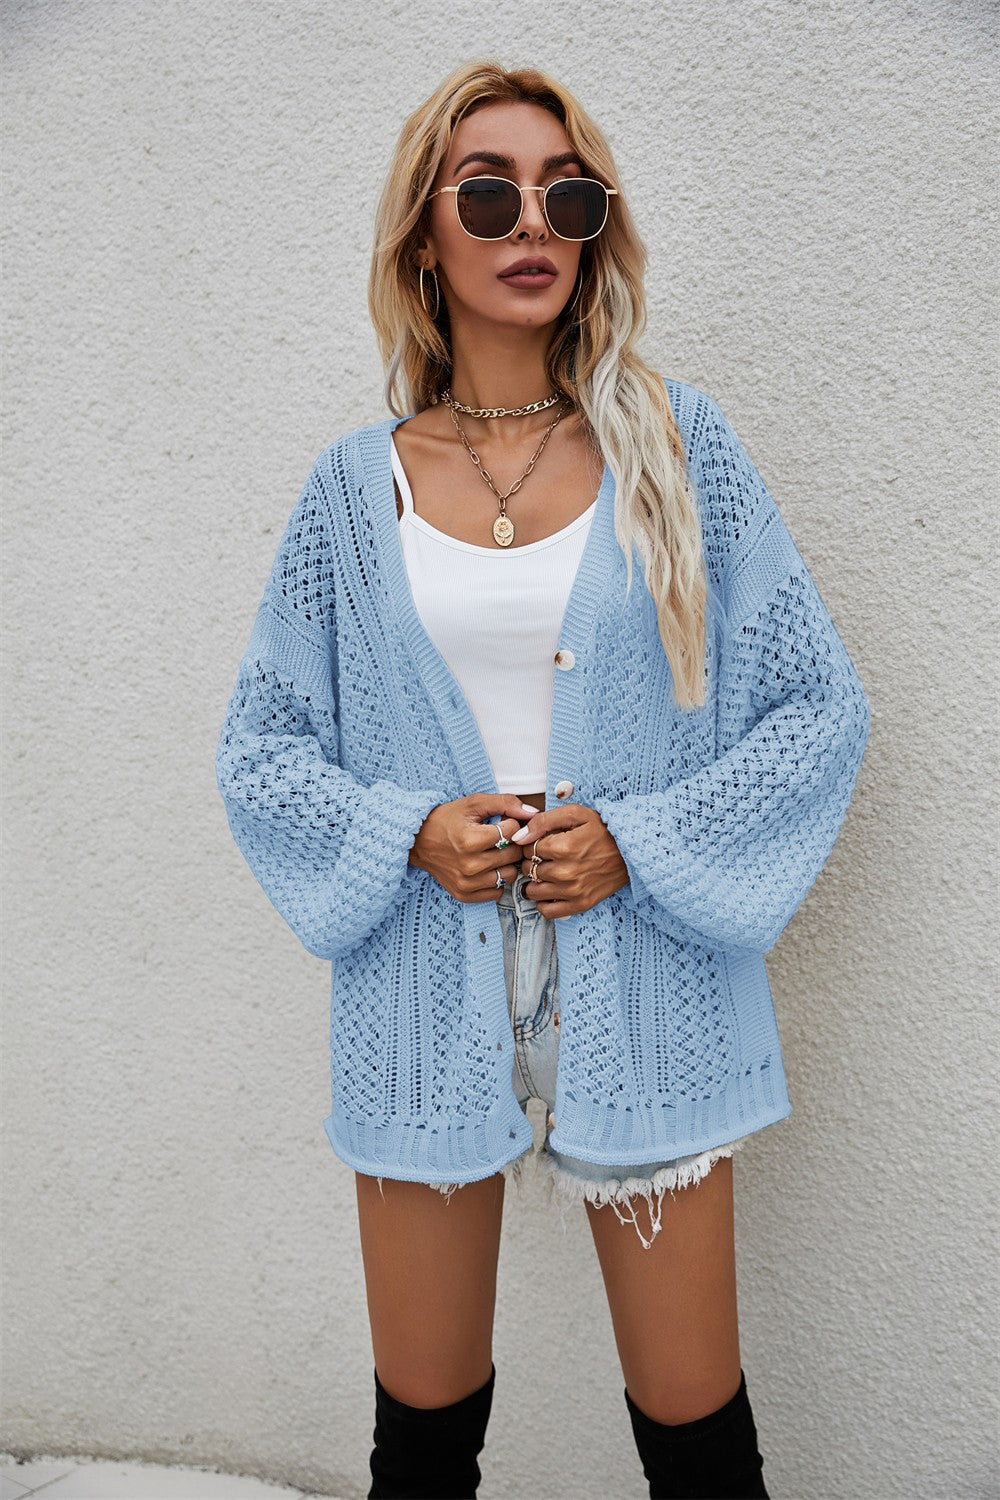 Openwork V-Neck Dropped Shoulder Cardigan - Blue / S - Women’s Clothing & Accessories - Shirts & Tops - 10 - 2024